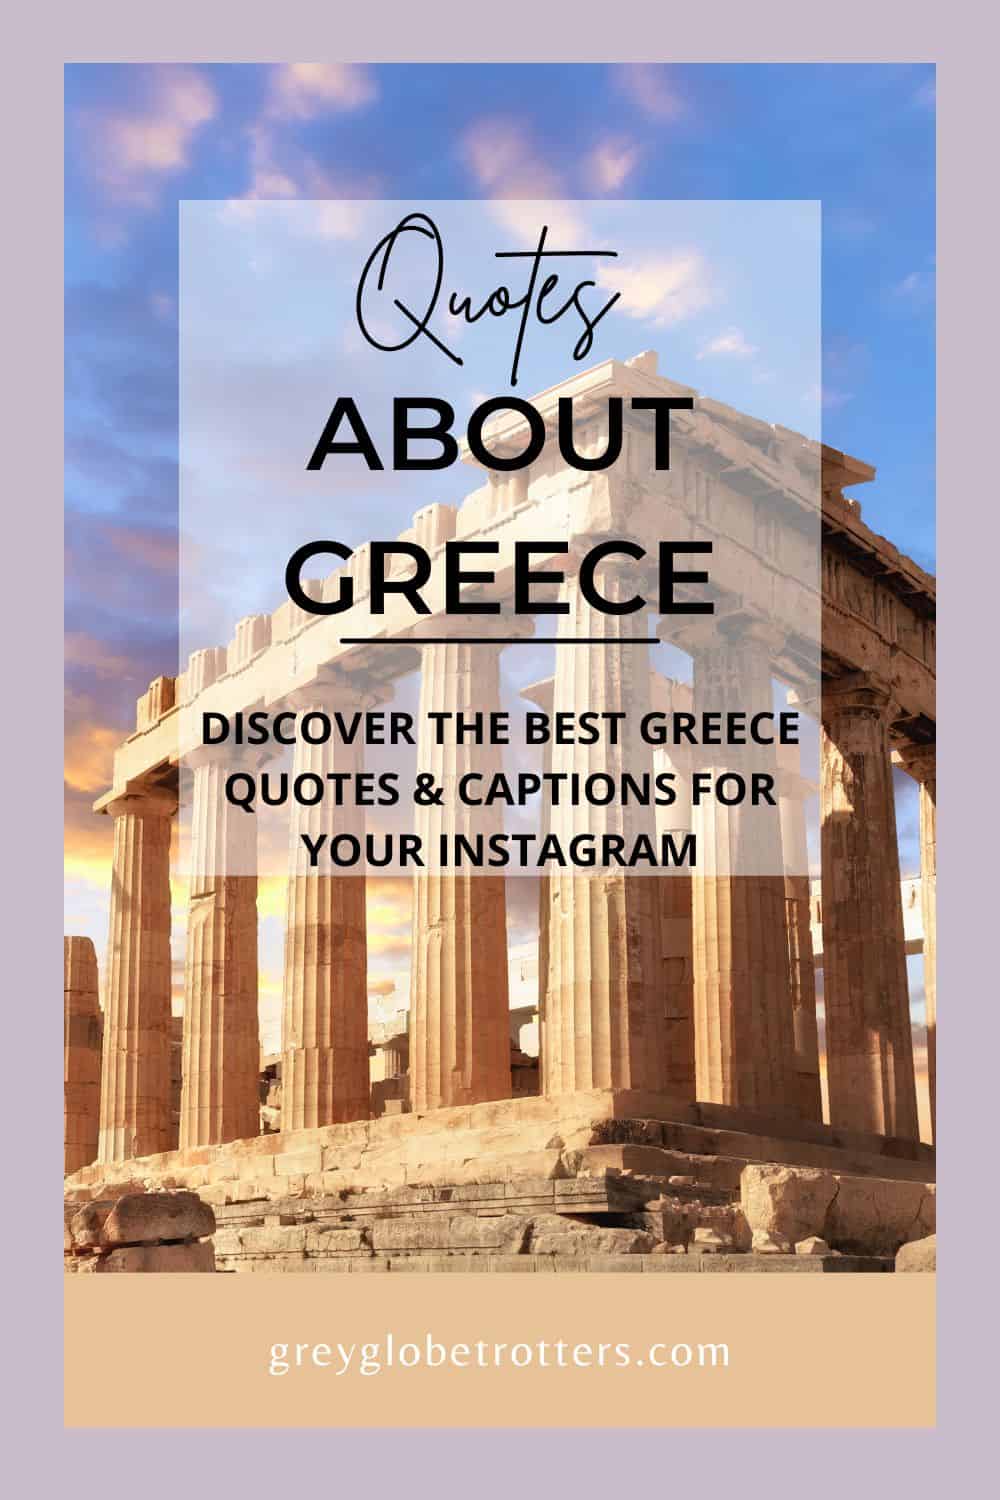 Image of the Parthenon overlaid with writing saying Discover the best Greece Quotes